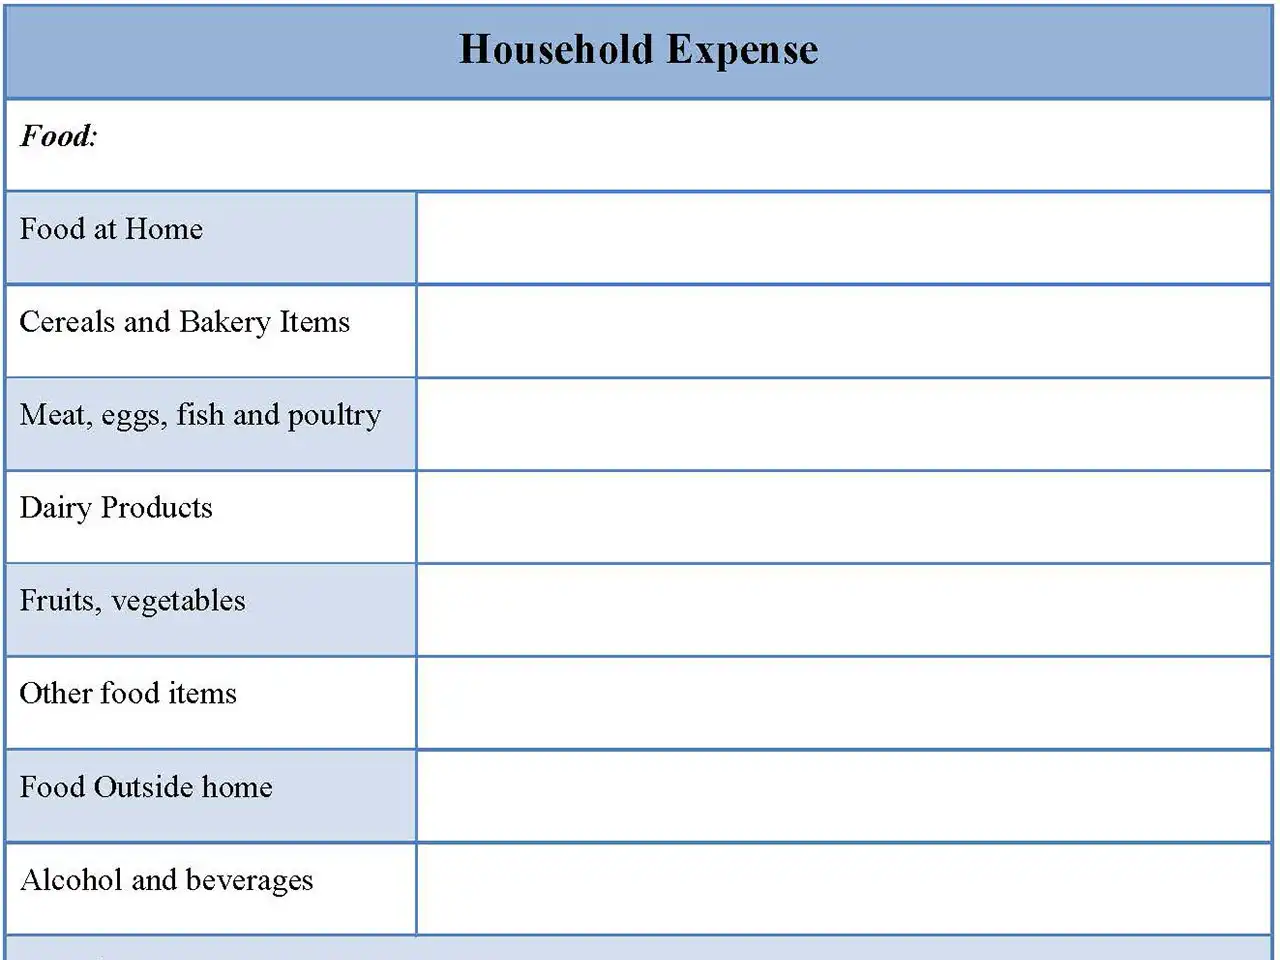 Household Expense Form